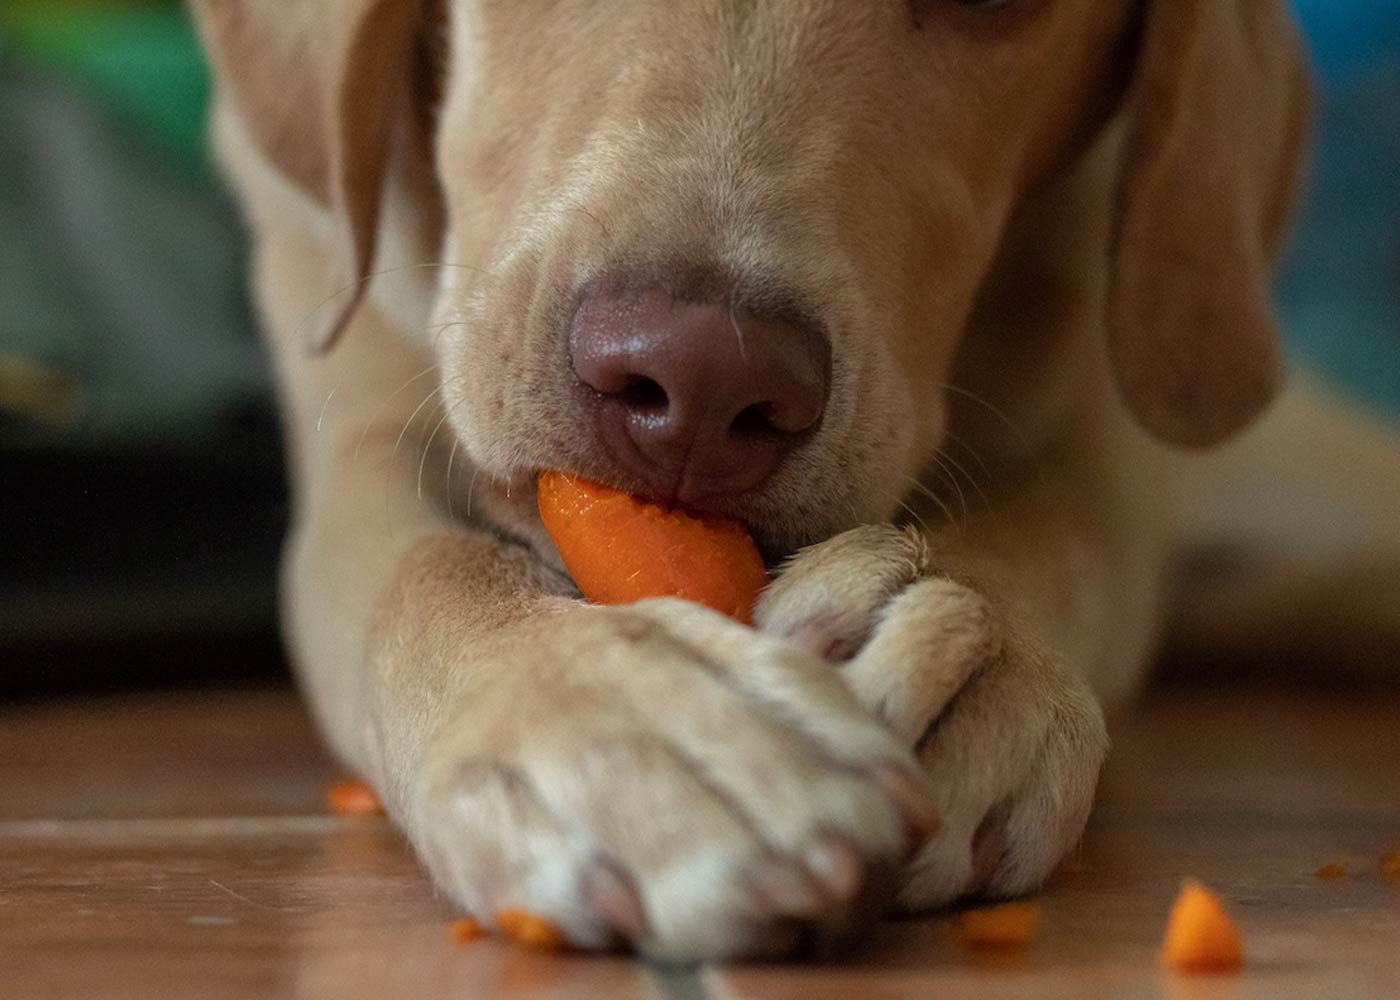 Vegetables that are Edible for Dogs